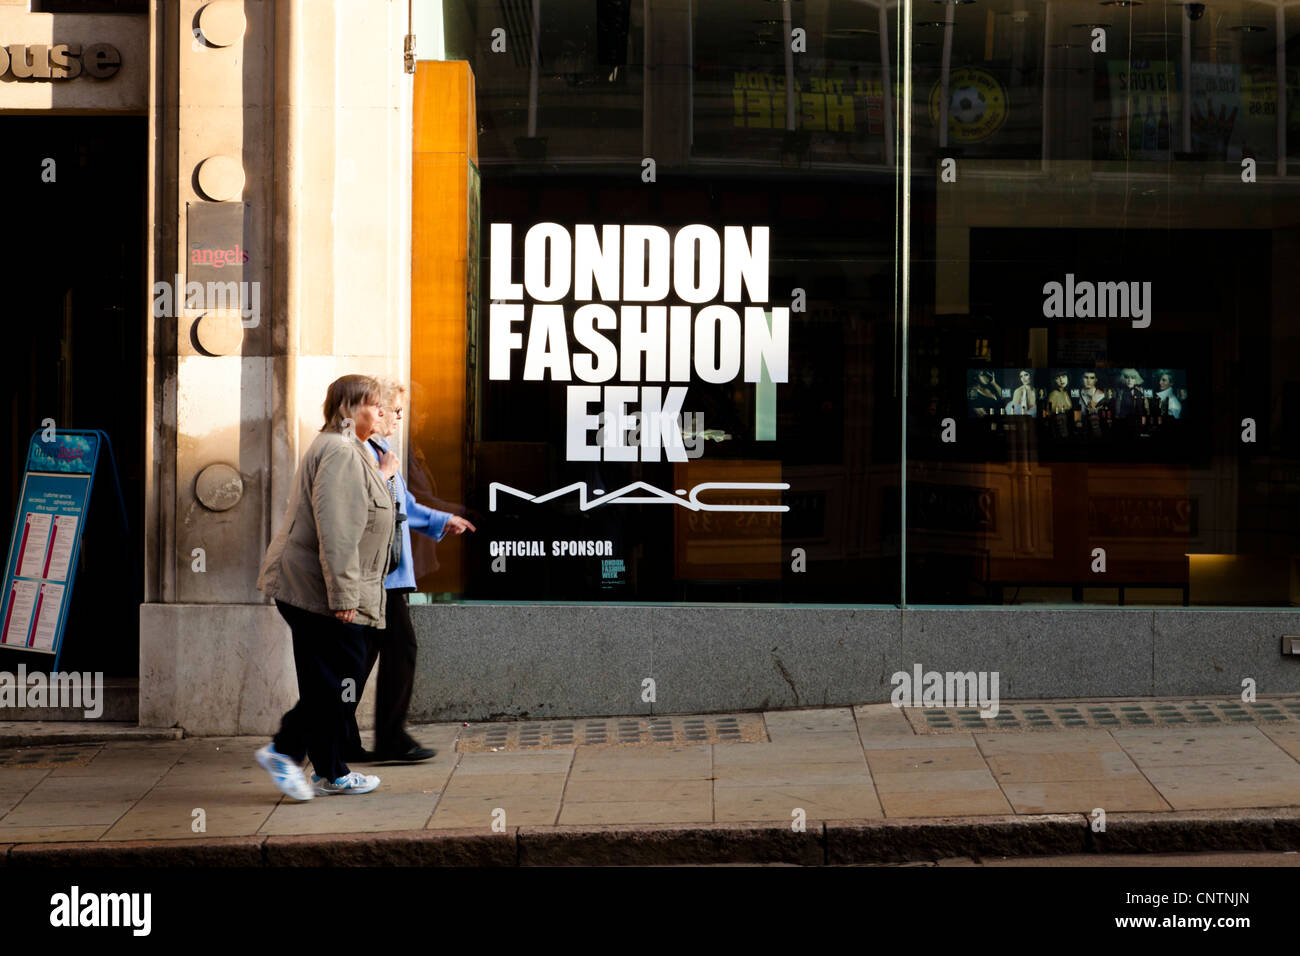 Misspelling due to lost letter. Humorous view of London Fashion Week shop window with two women shoppers and several models on a tv screen, UK Stock Photo